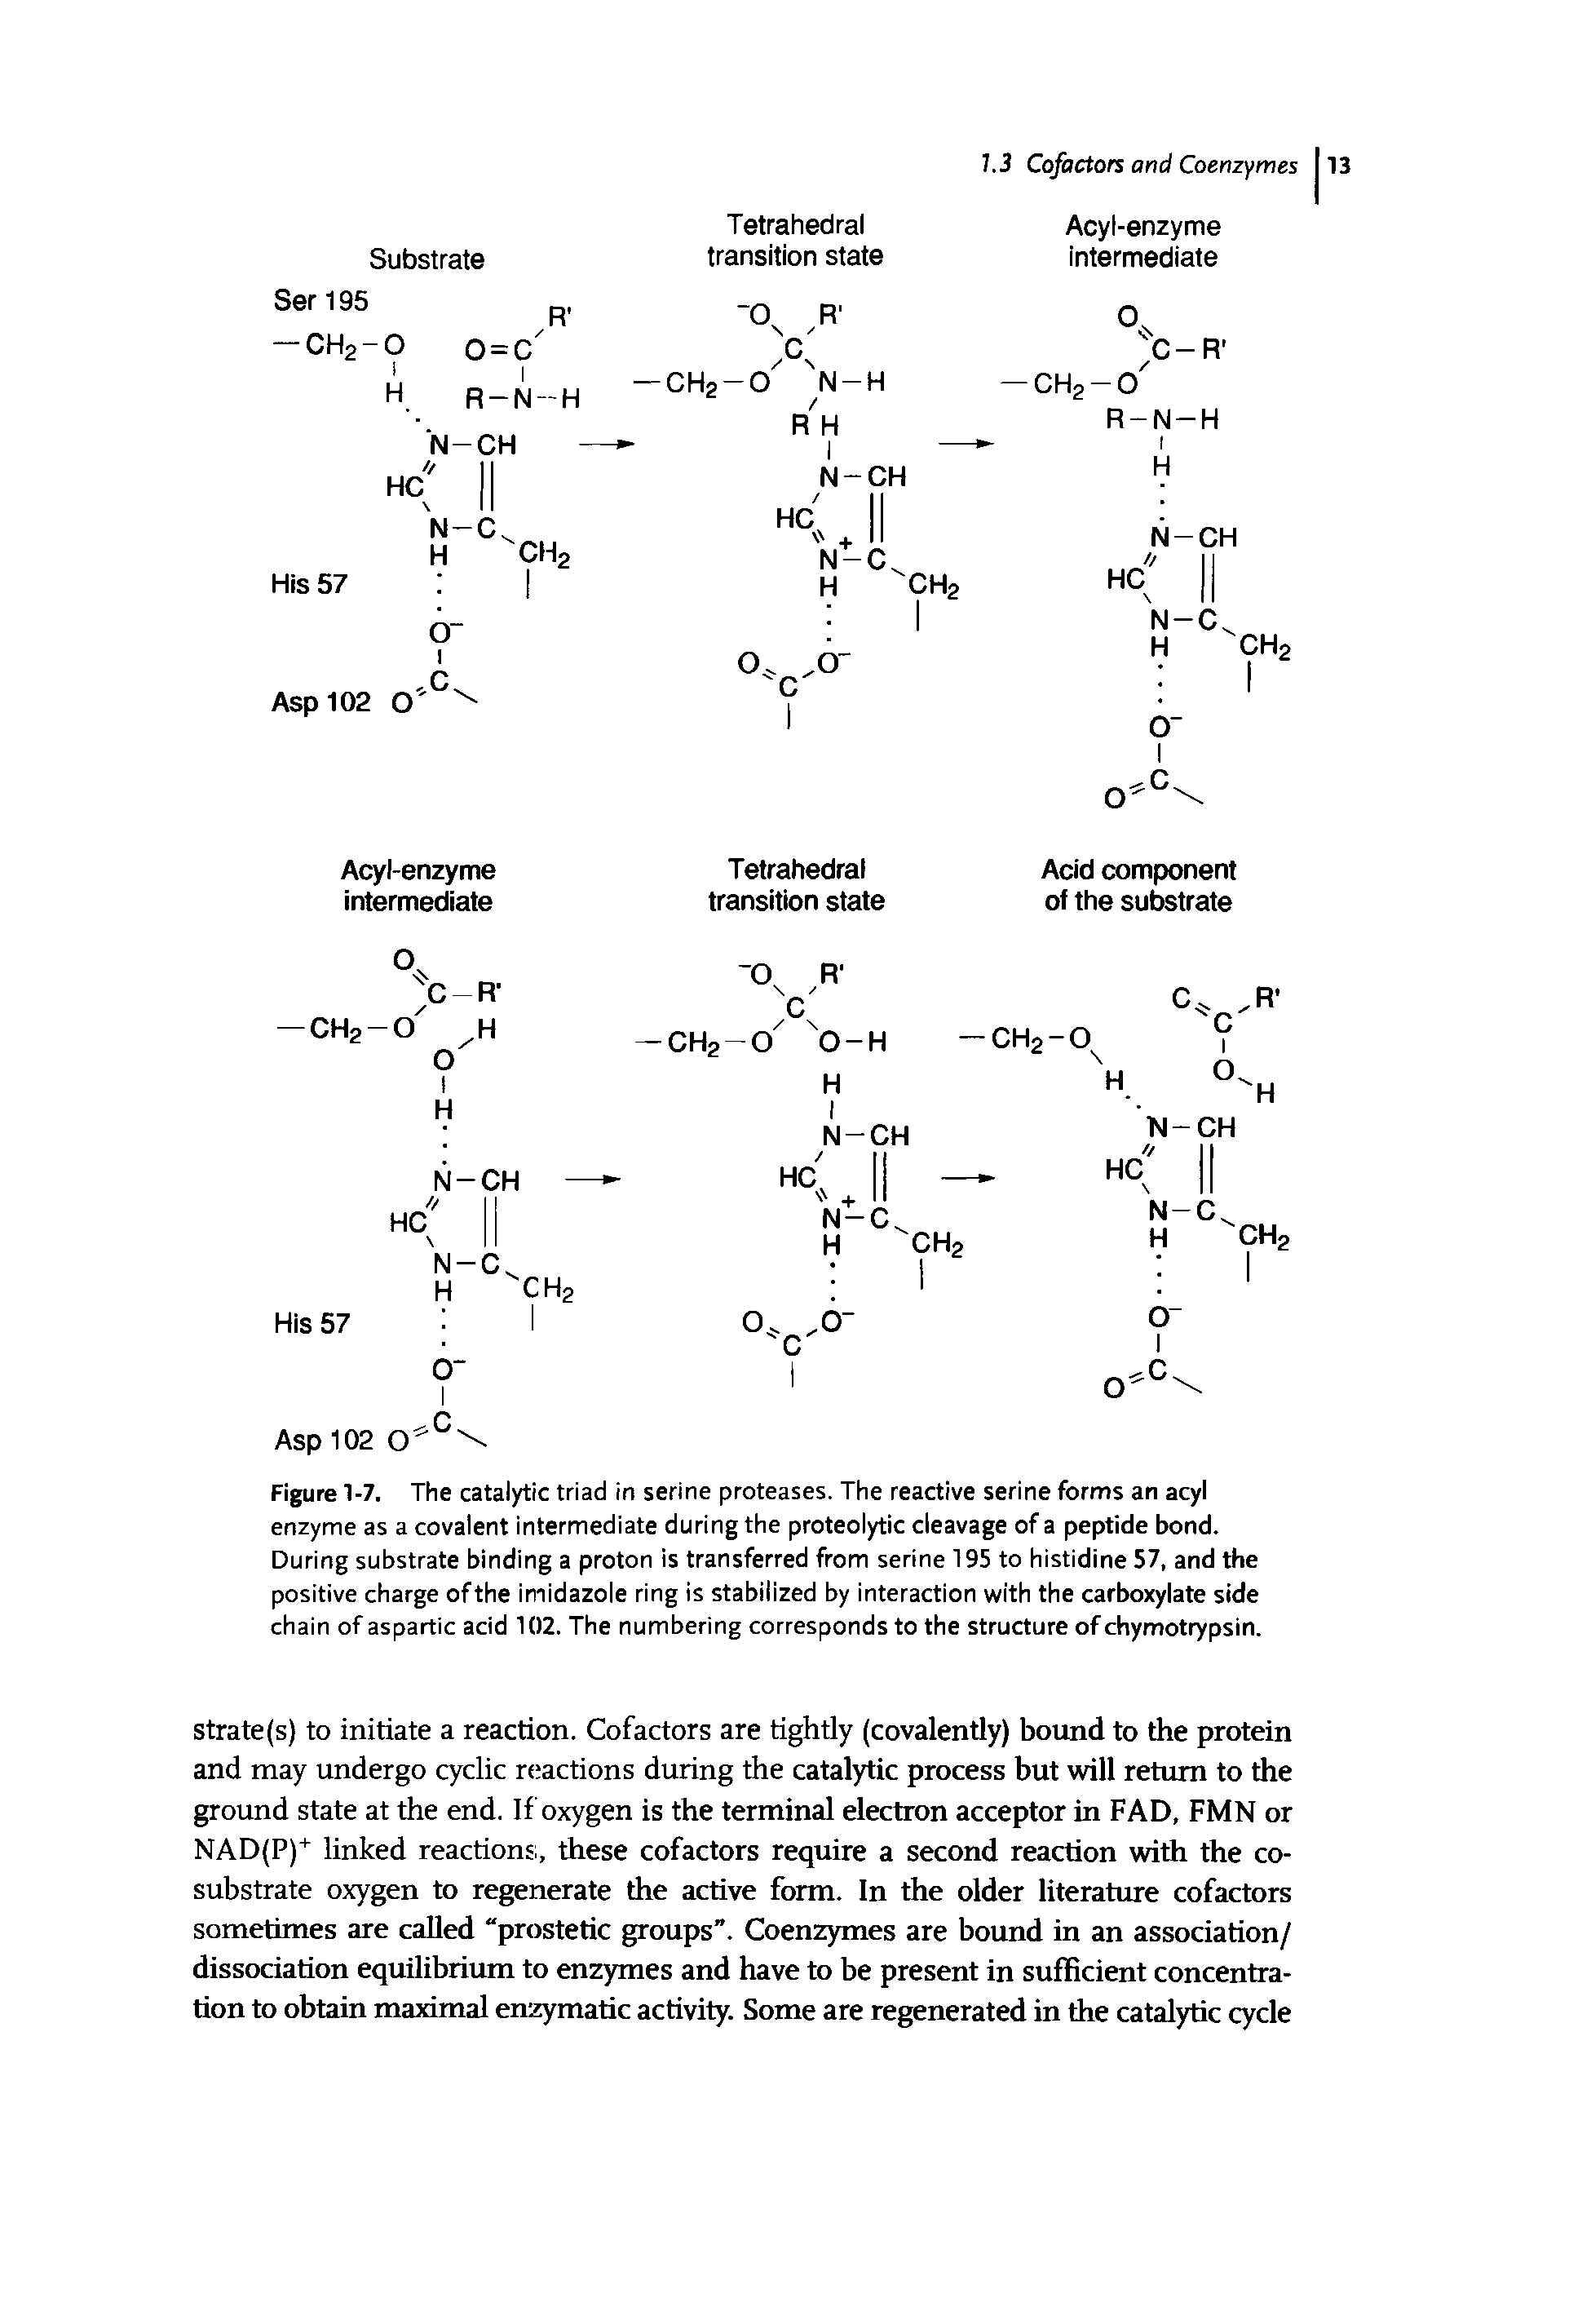 Figure 1-7. The catalytic triad in serine proteases. The reactive serine forms an acyl enzyme as a covalent intermediate during the proteolytic cleavage of a peptide bond. During substrate binding a proton is transferred from serine 195 to histidine 57, and the positive charge of the imidazole ring is stabilized by interaction with the carboxylate side chain of aspartic acid 102. The numbering corresponds to the structure of chymotrypsin.